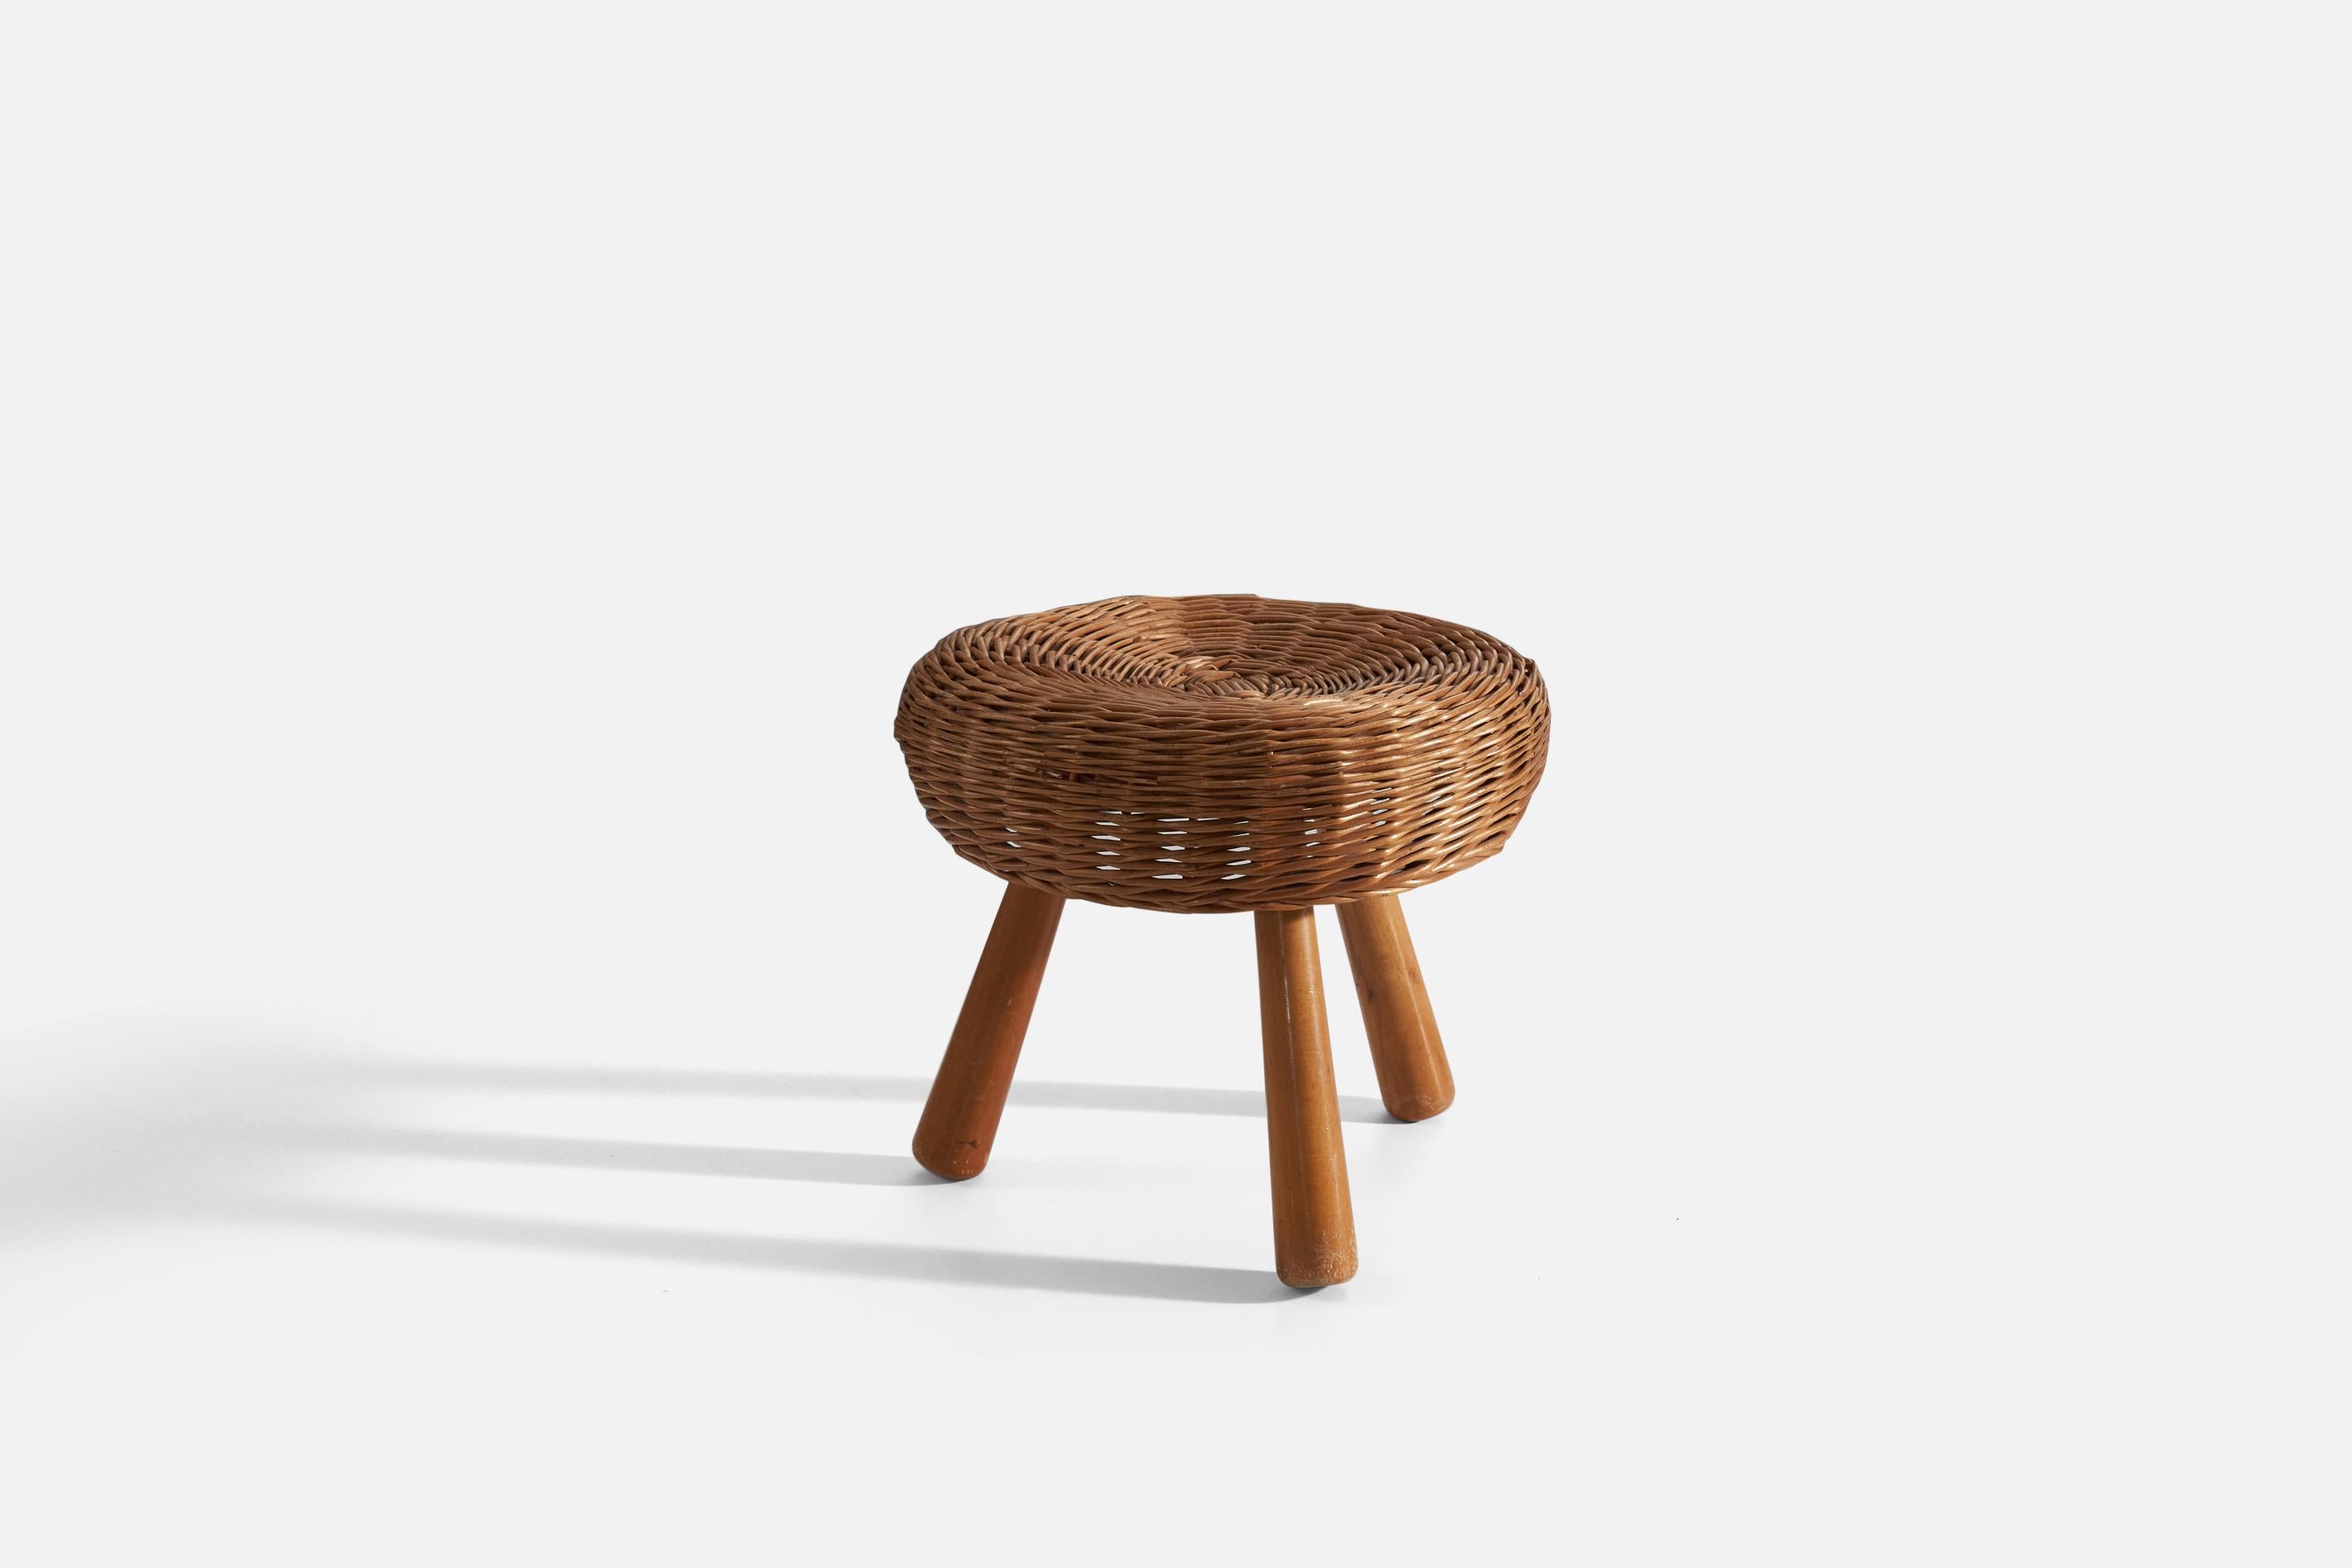 A wicker and wood stool, designed and produced by Tony Paul, United States, 1950s.
 